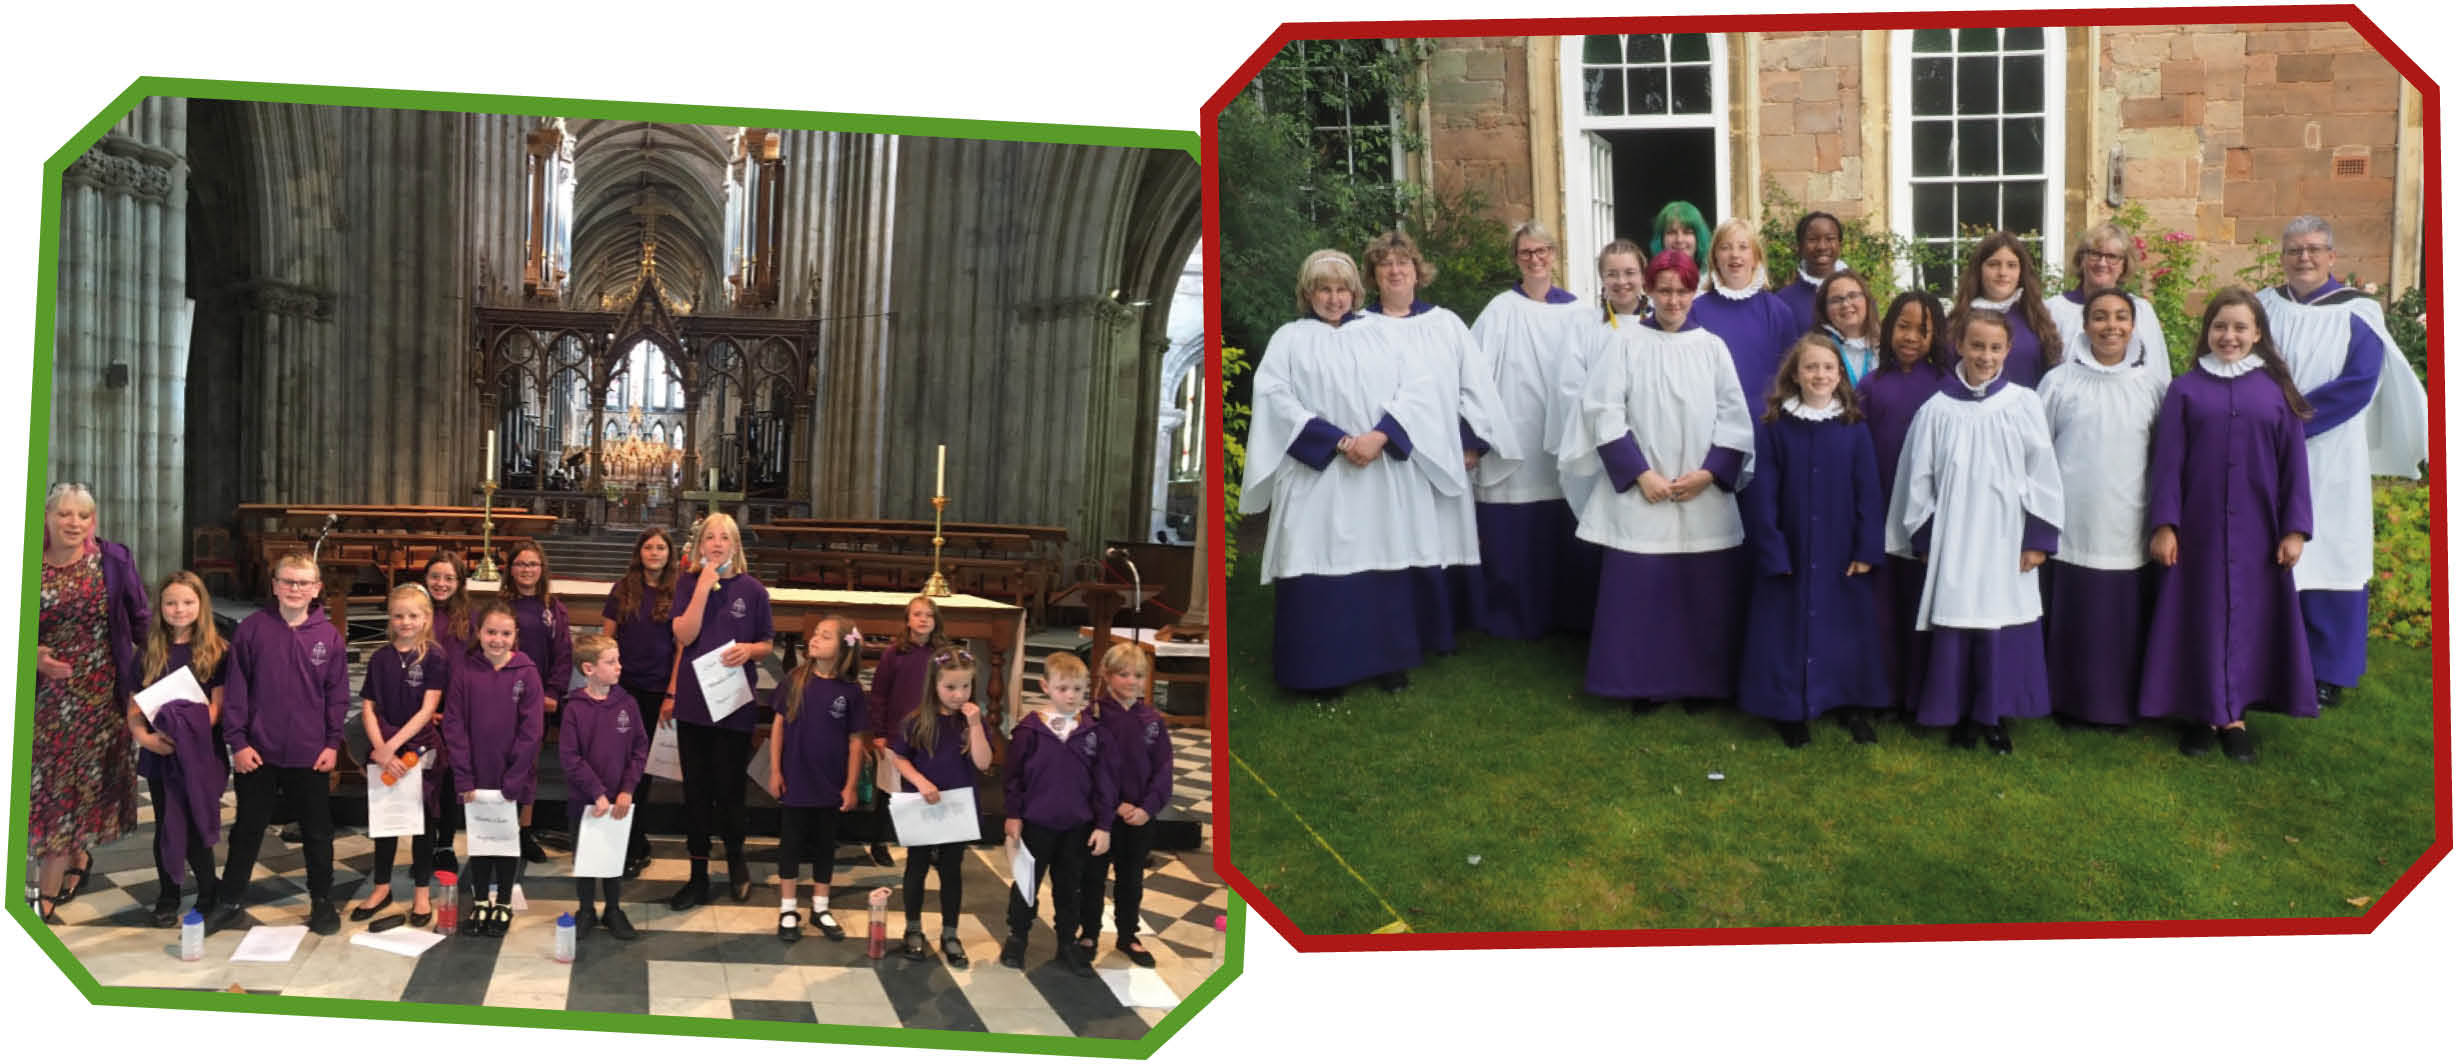 collage of two images: 1) young children in school uniform singing at the communion table in church 2) the choir wearing a mixture of cassocks and surplices stood outside on the lawn